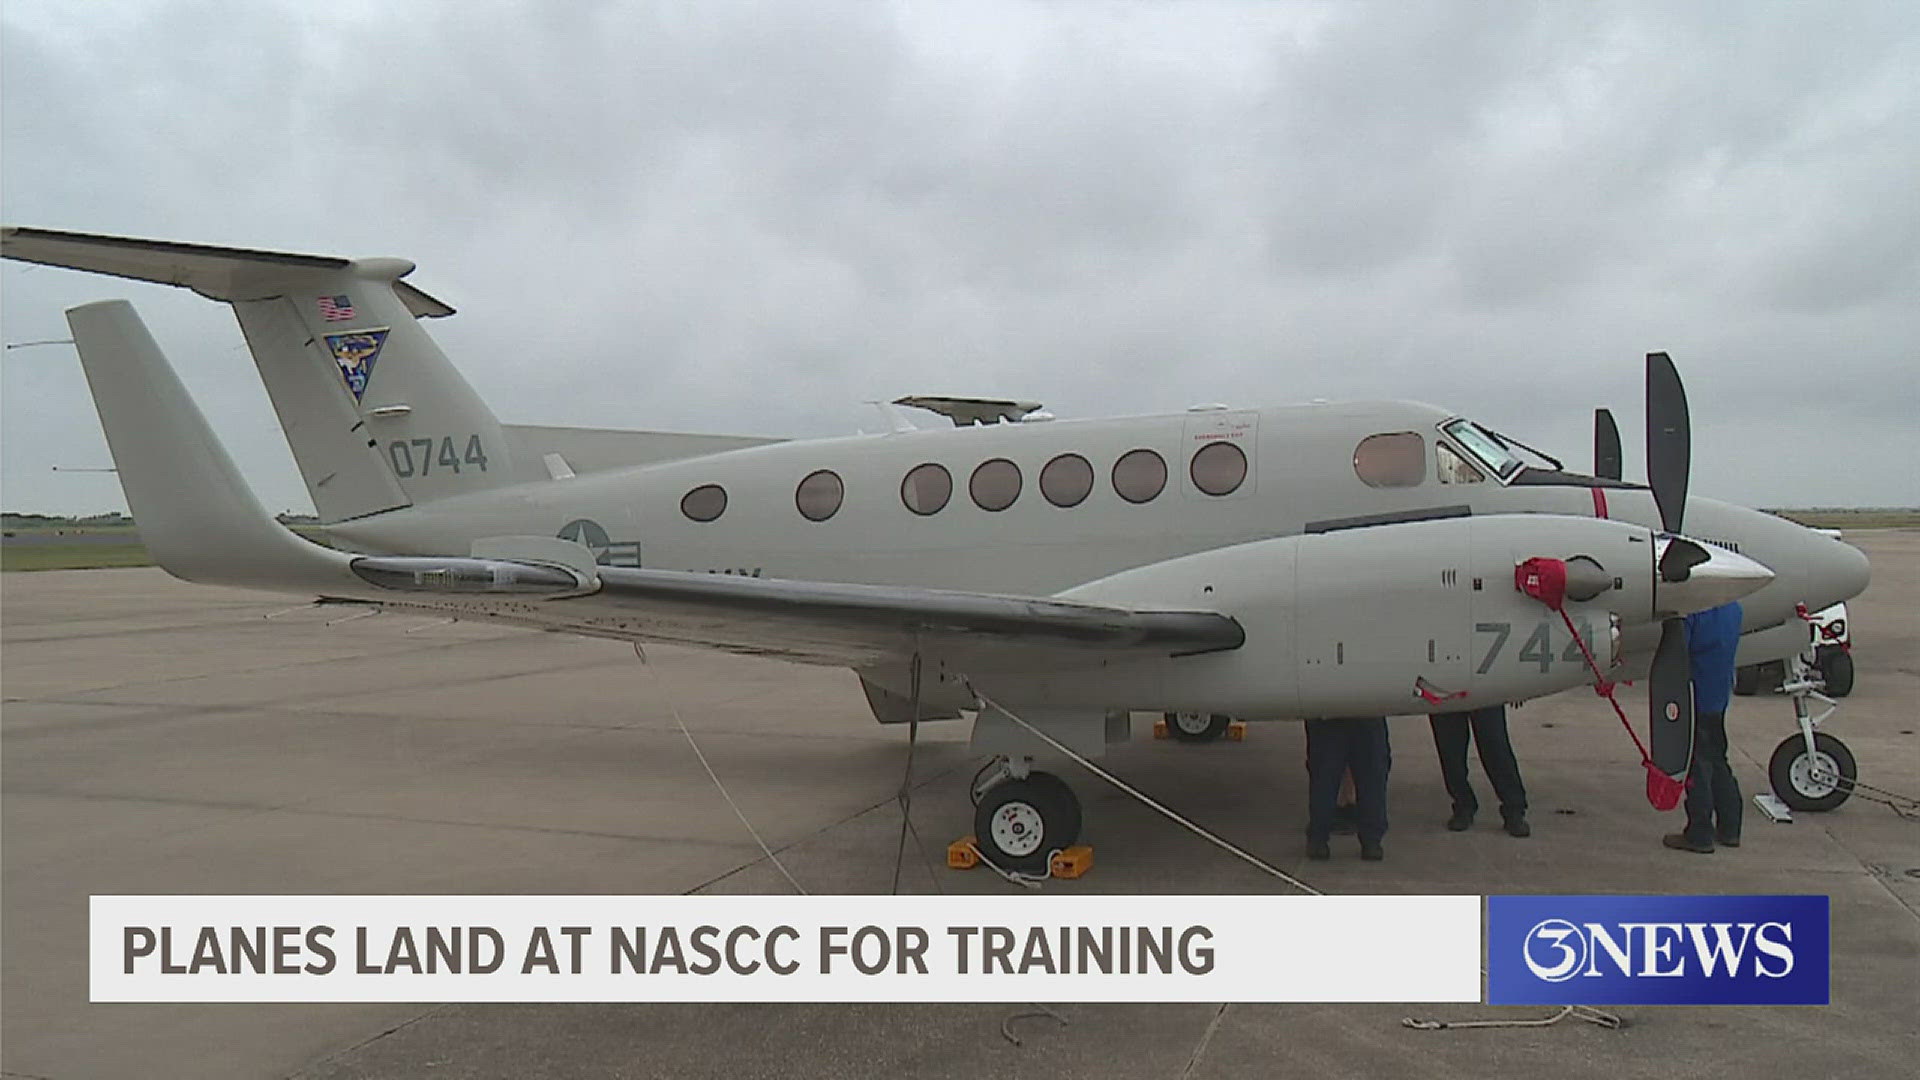 The training program is going to have 25 of the new planes for pilots to train on beginning in January 2025.